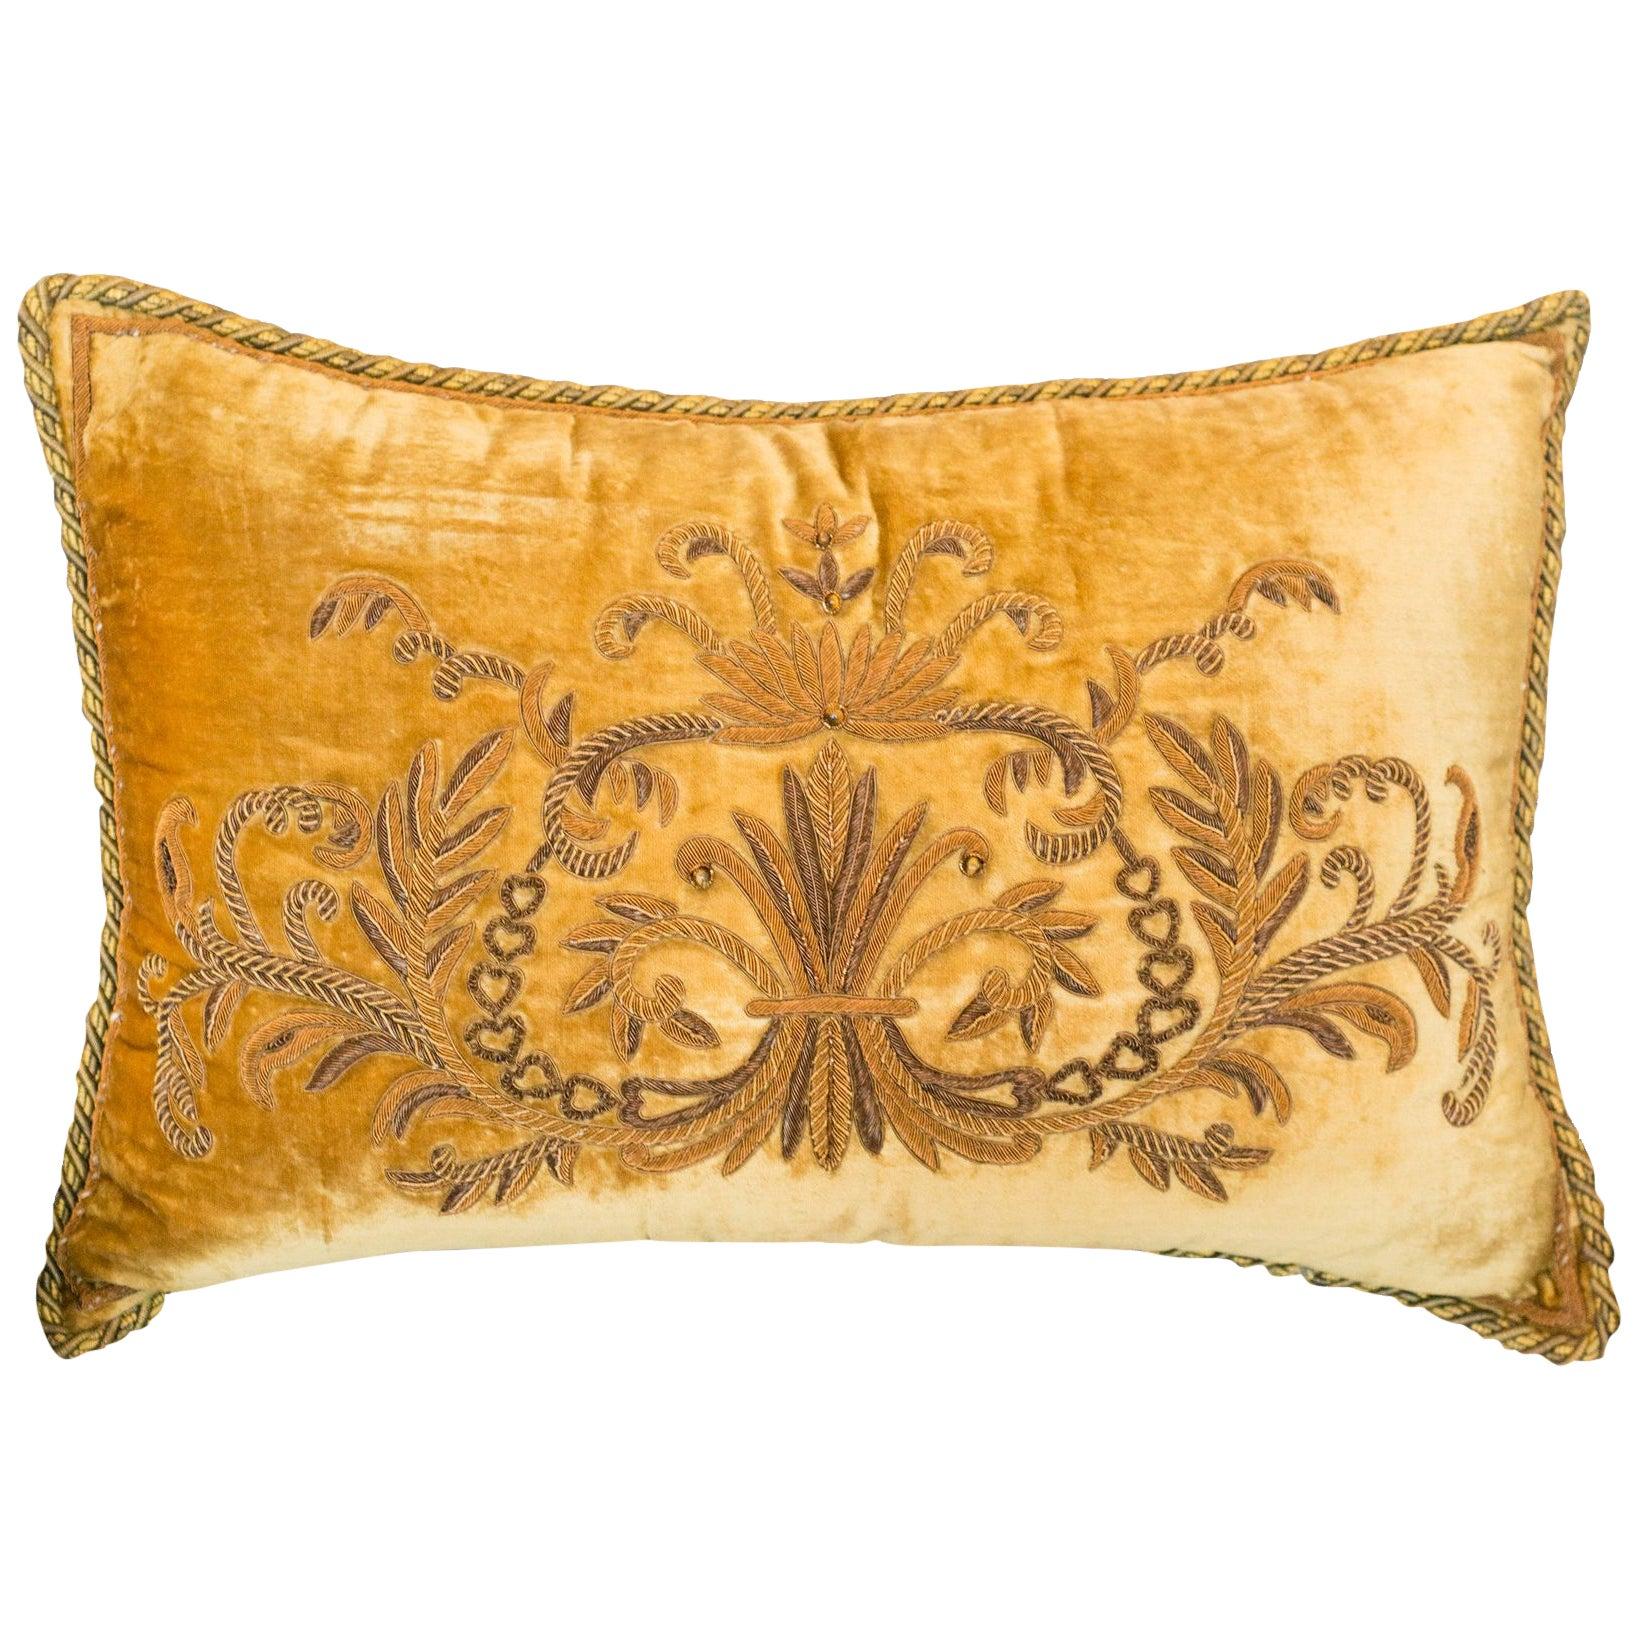 Large Gold Cotton Velvet Pillow with Metallic Embroidery and Tigers' Eye Beads